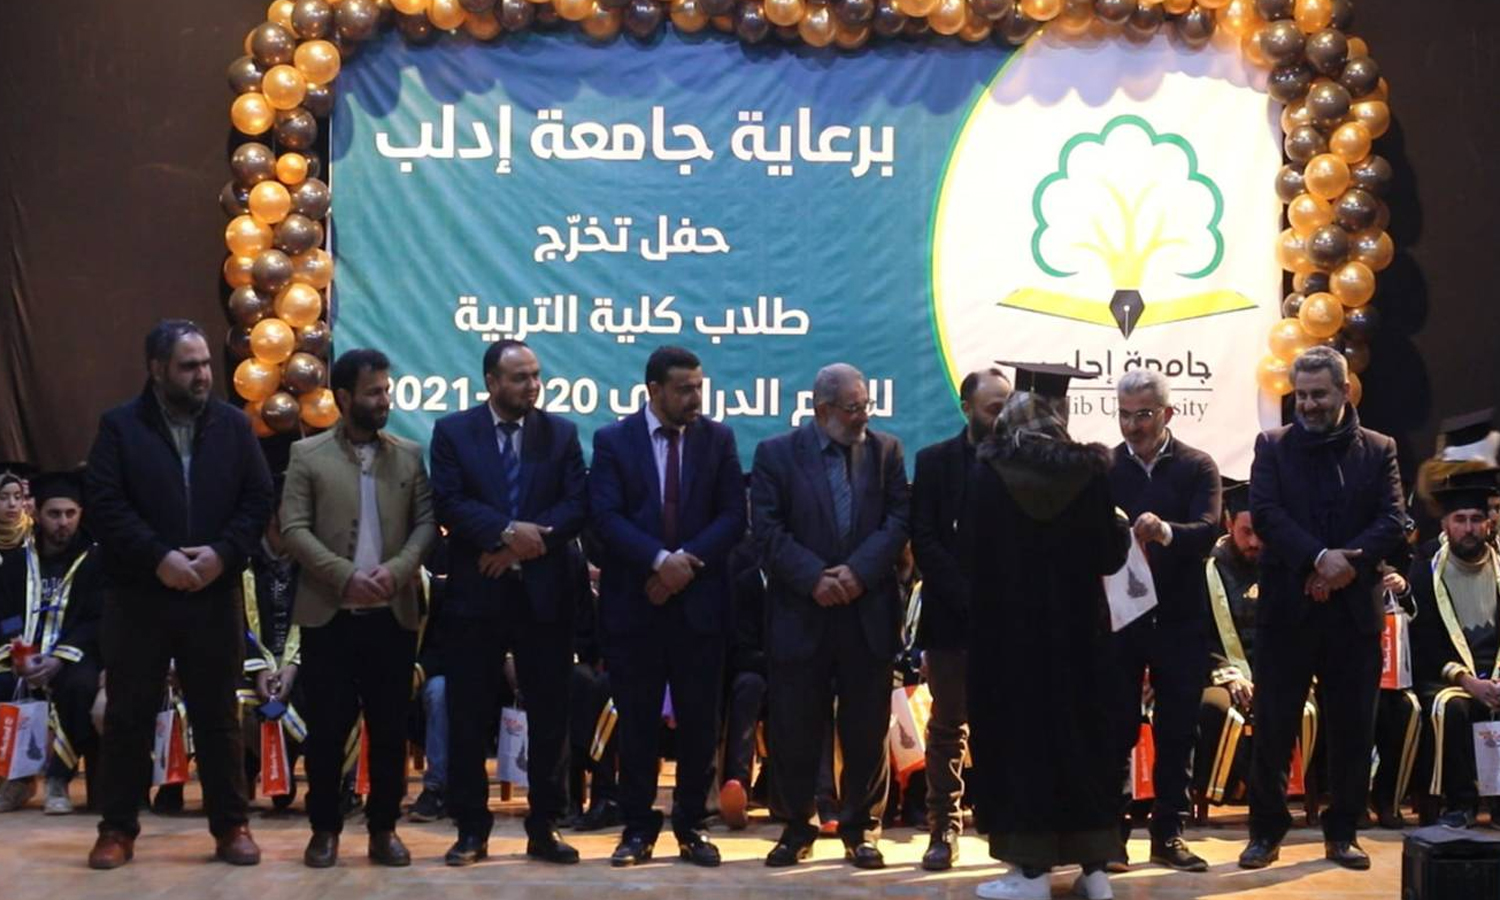 The graduation ceremony of the students of the Education Faculty in Idlib University - 01 April 2022 (Idlib University)